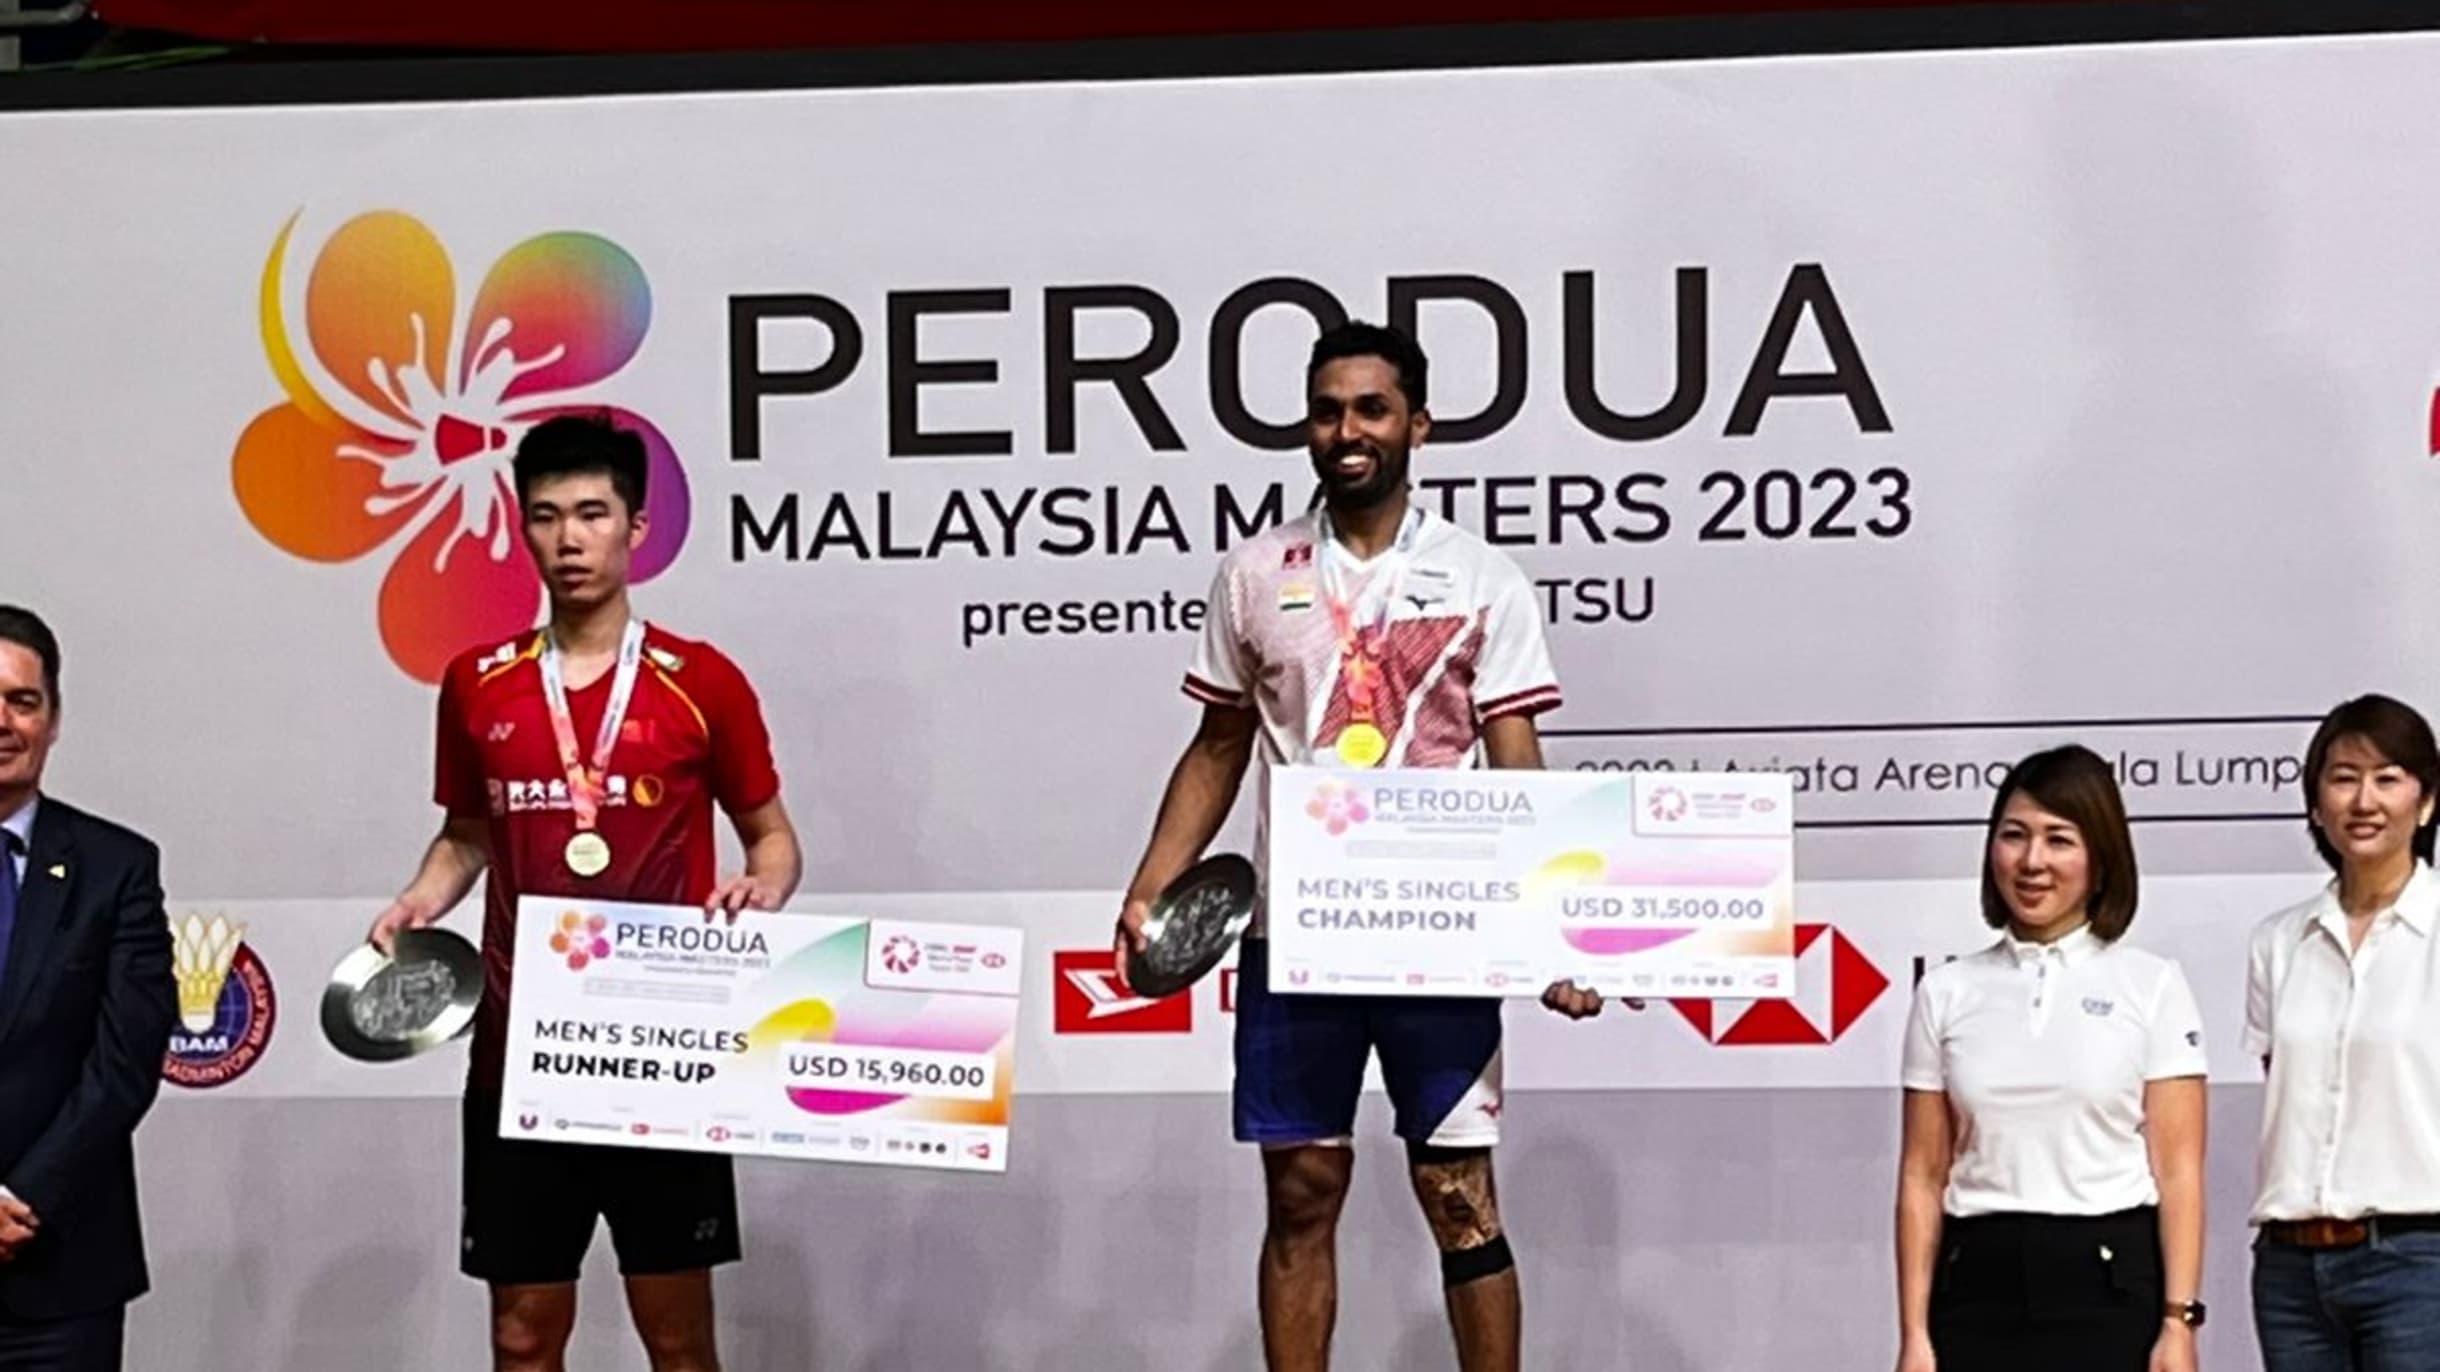 Malaysia Masters 2023 badminton HS Prannoy wins mens singles title